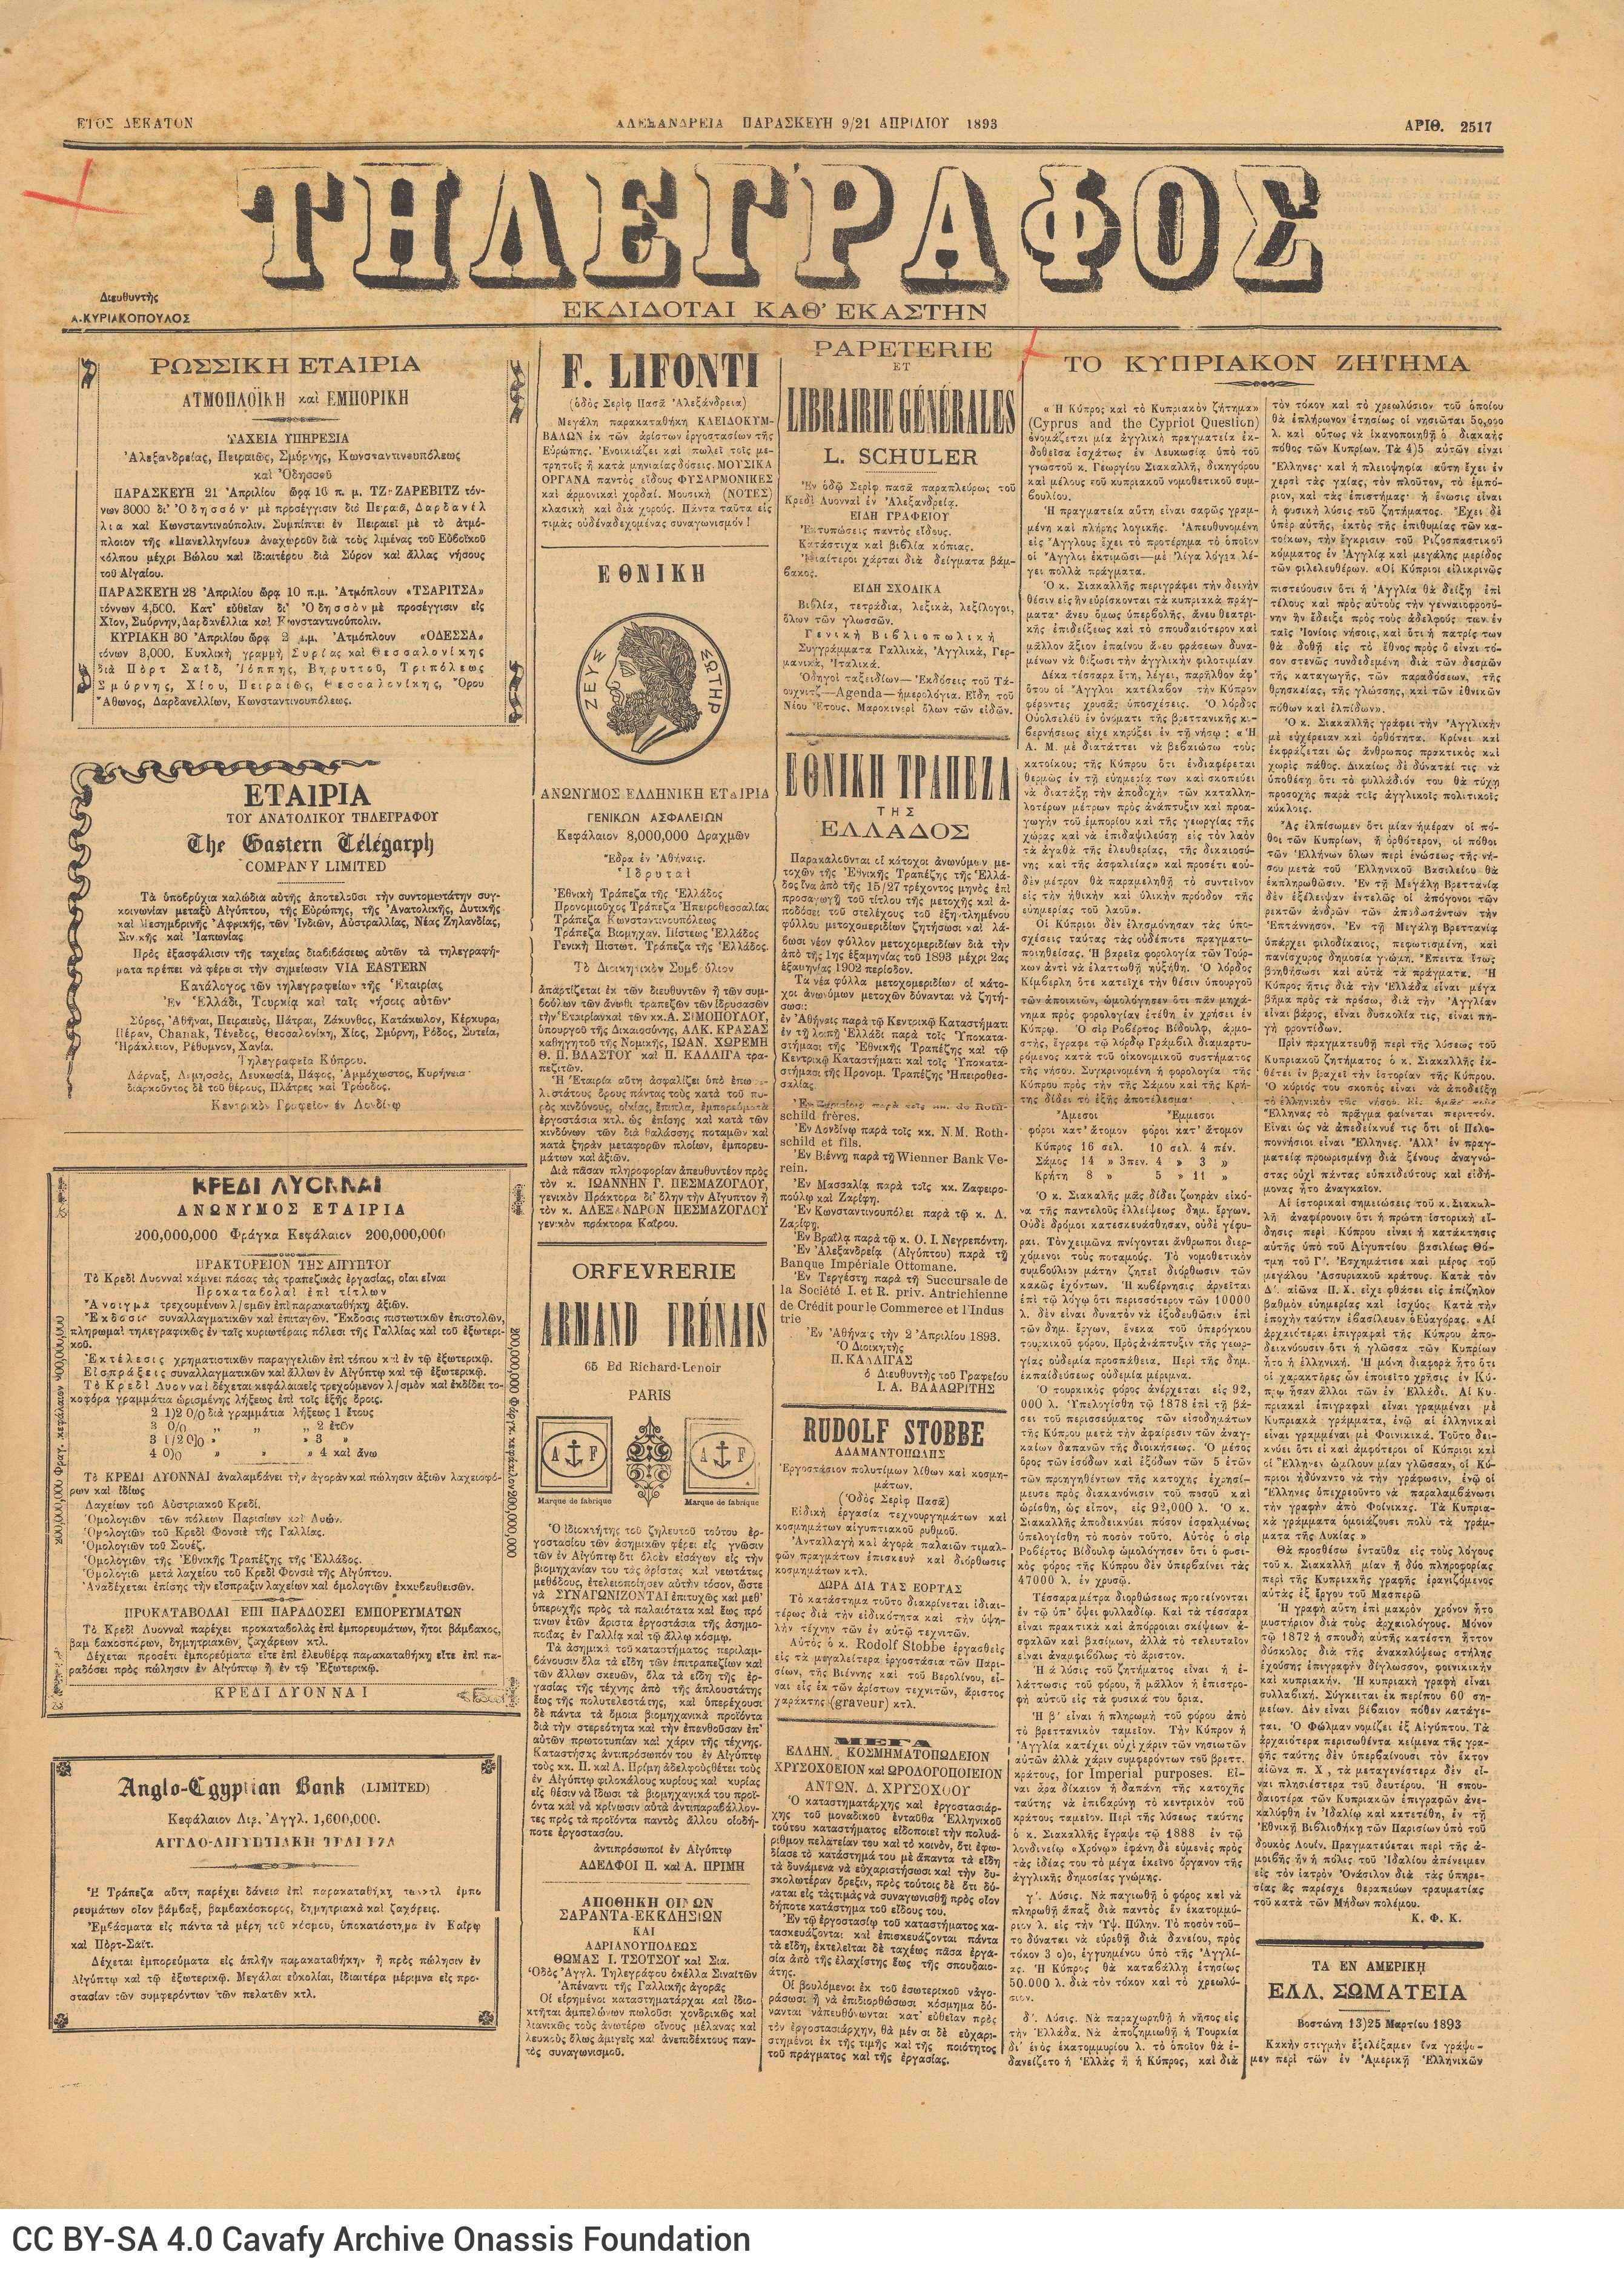 Issue of the newspaper *Tilegrafos* of Alexandria. Article by Cavafy, on the first page, entitled "The Cypriot Question" a